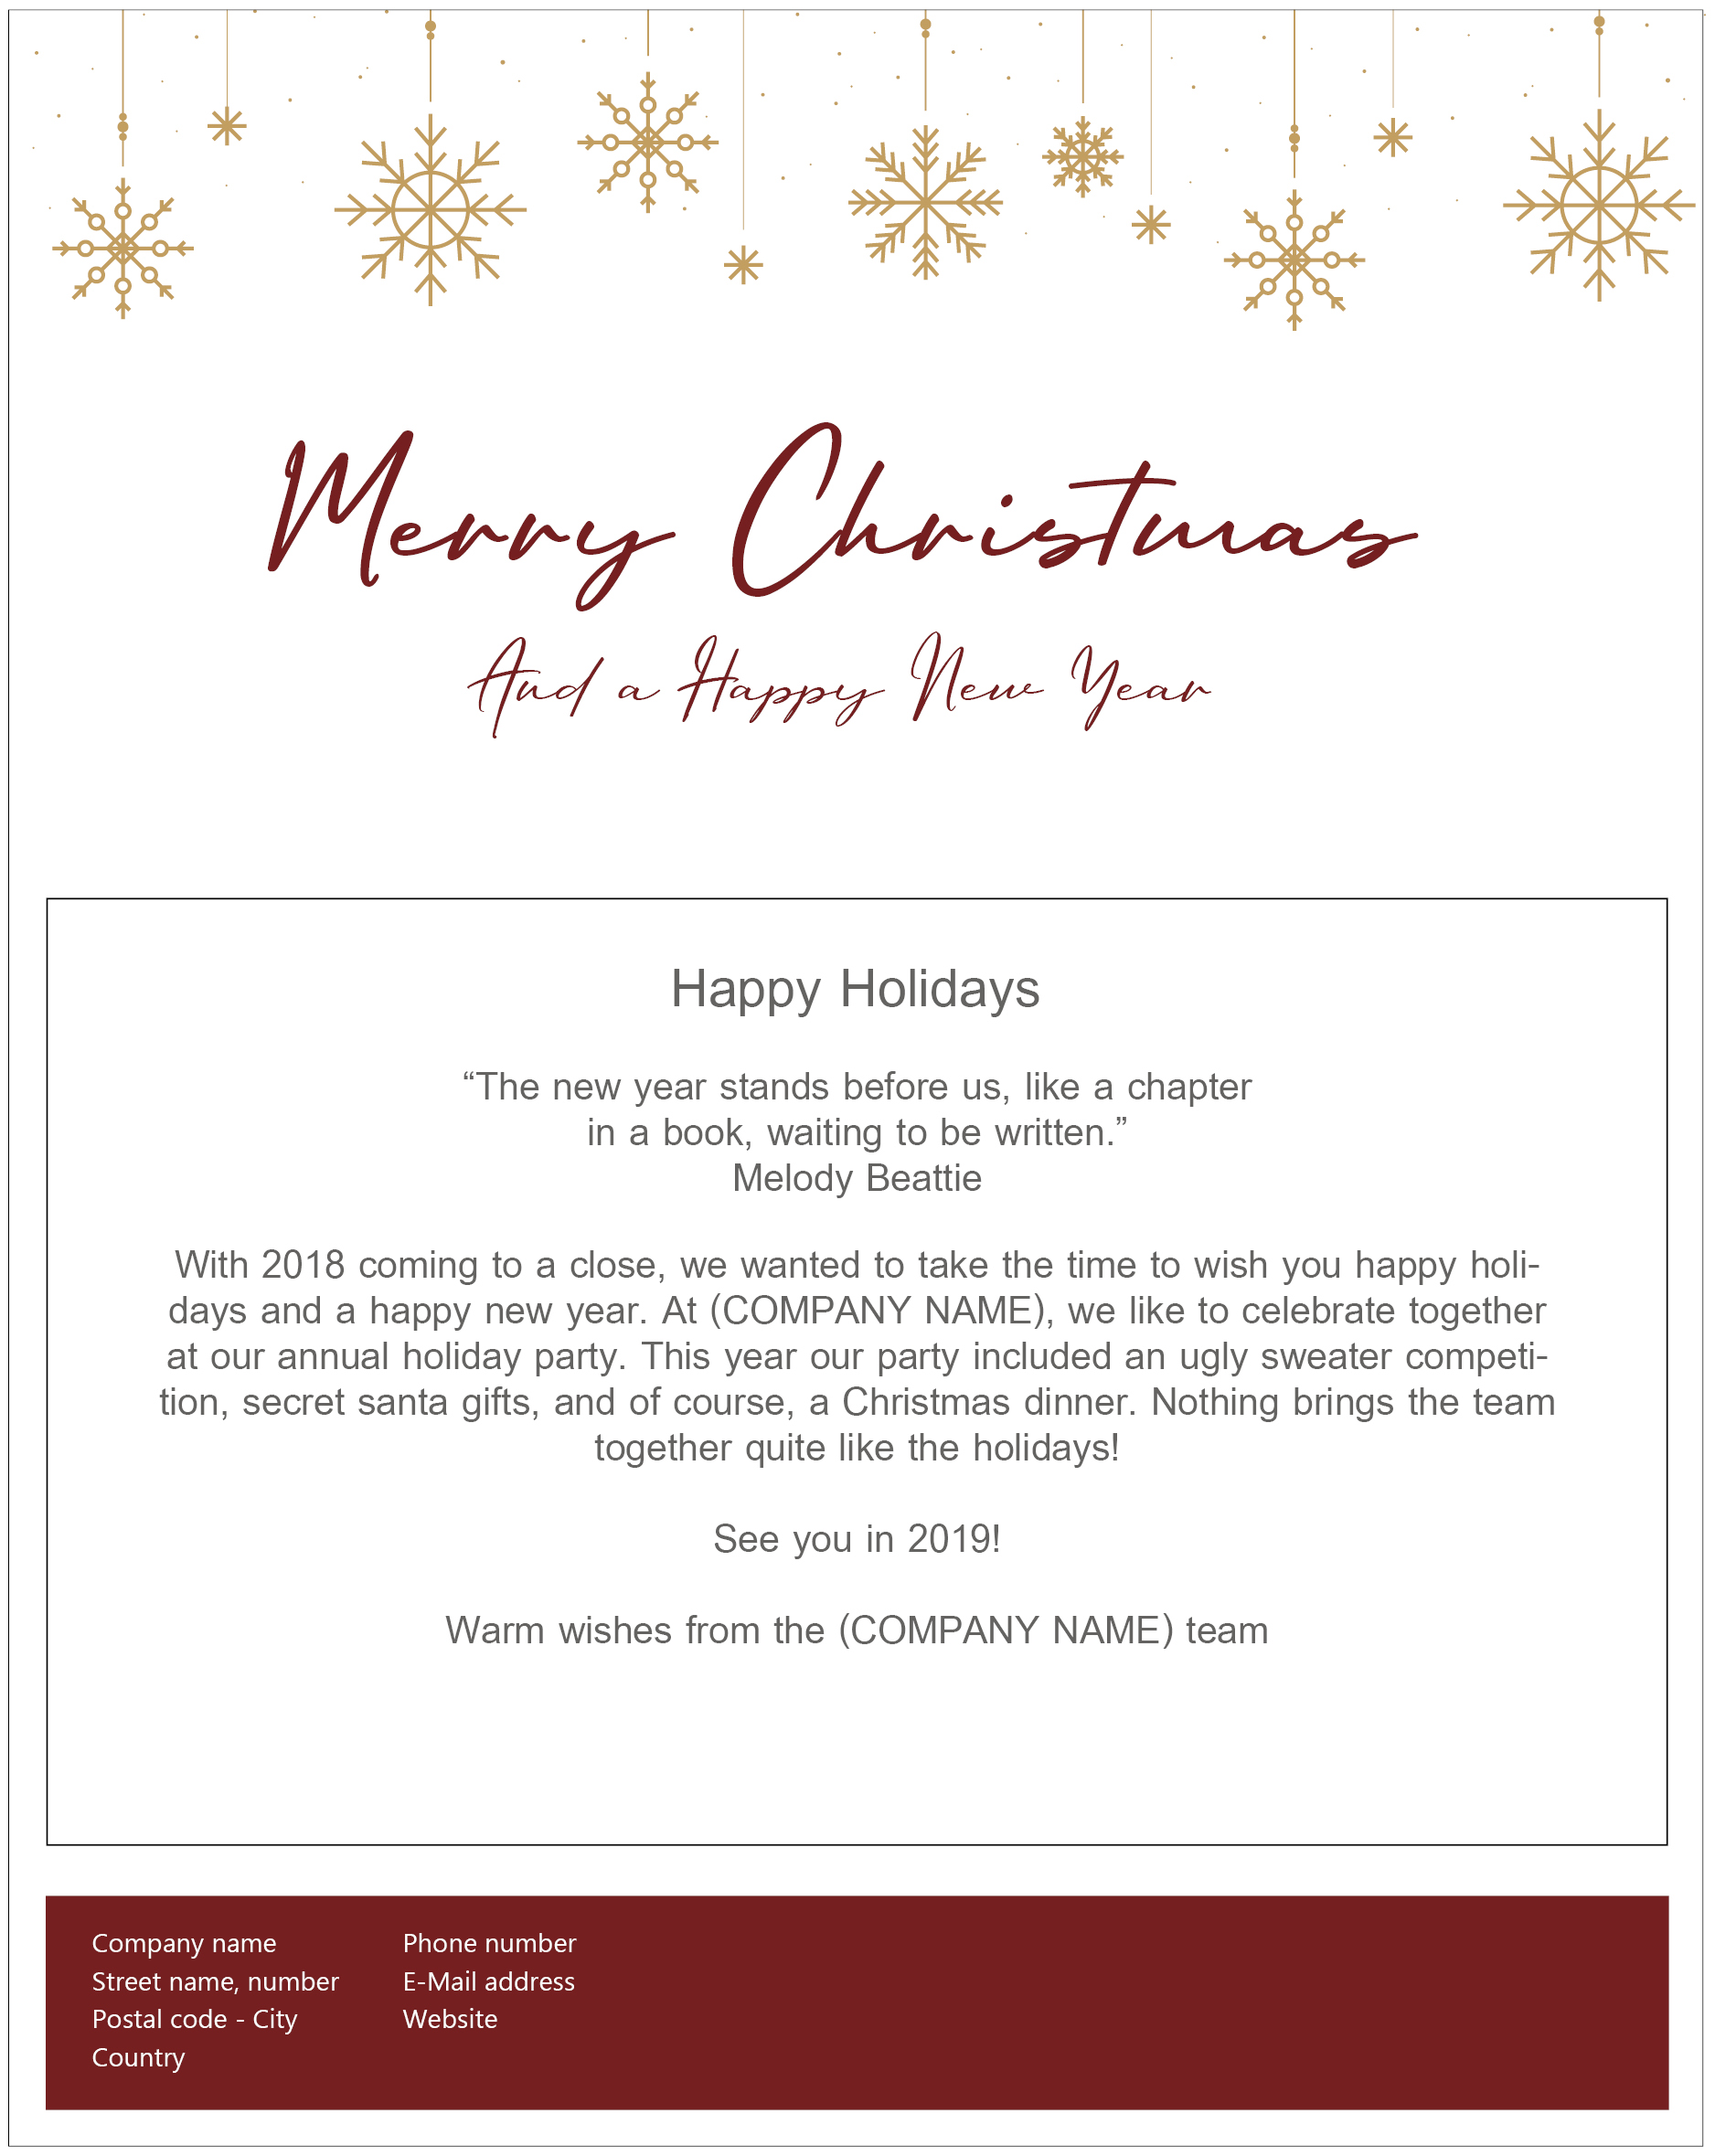 Recruiting at Christmas: 4 Christmas Nurturing Newsletter Examples